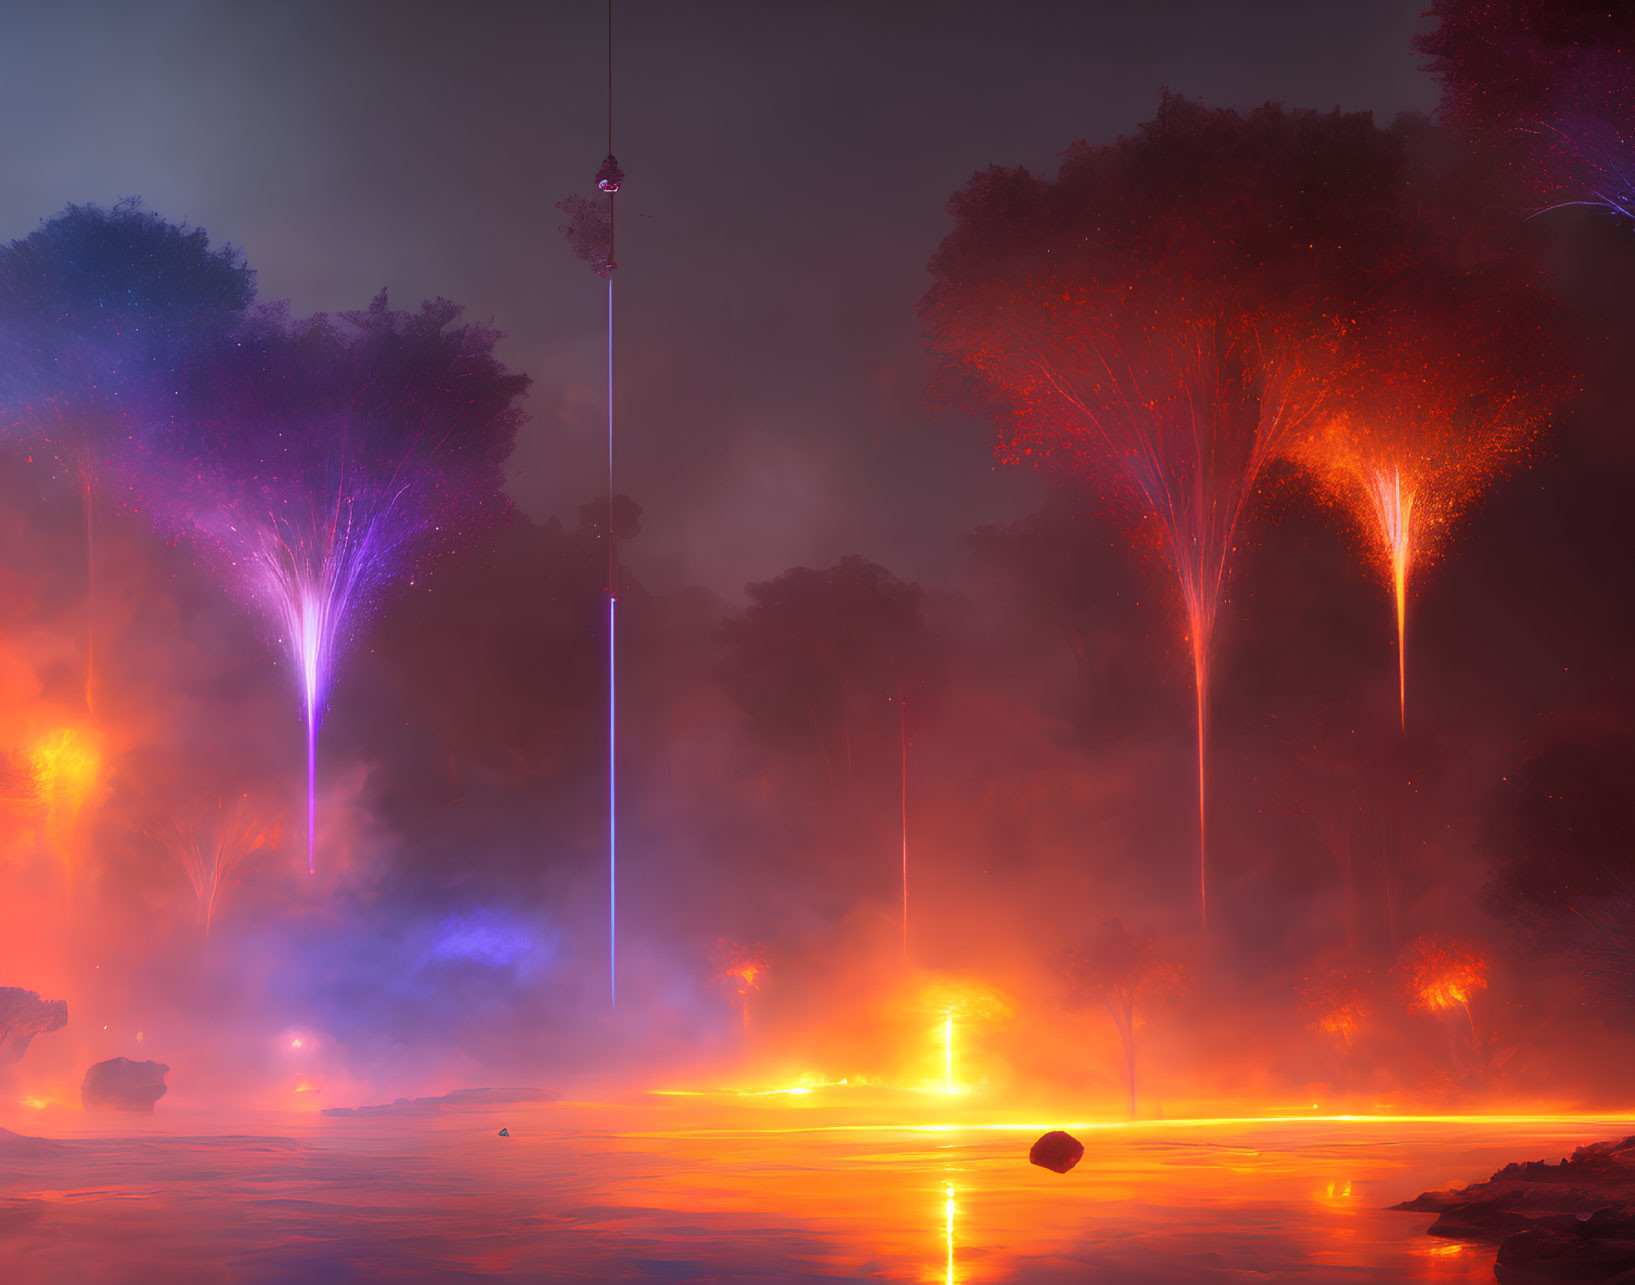 Ethereal trees in surreal landscape with misty river and vibrant orange light